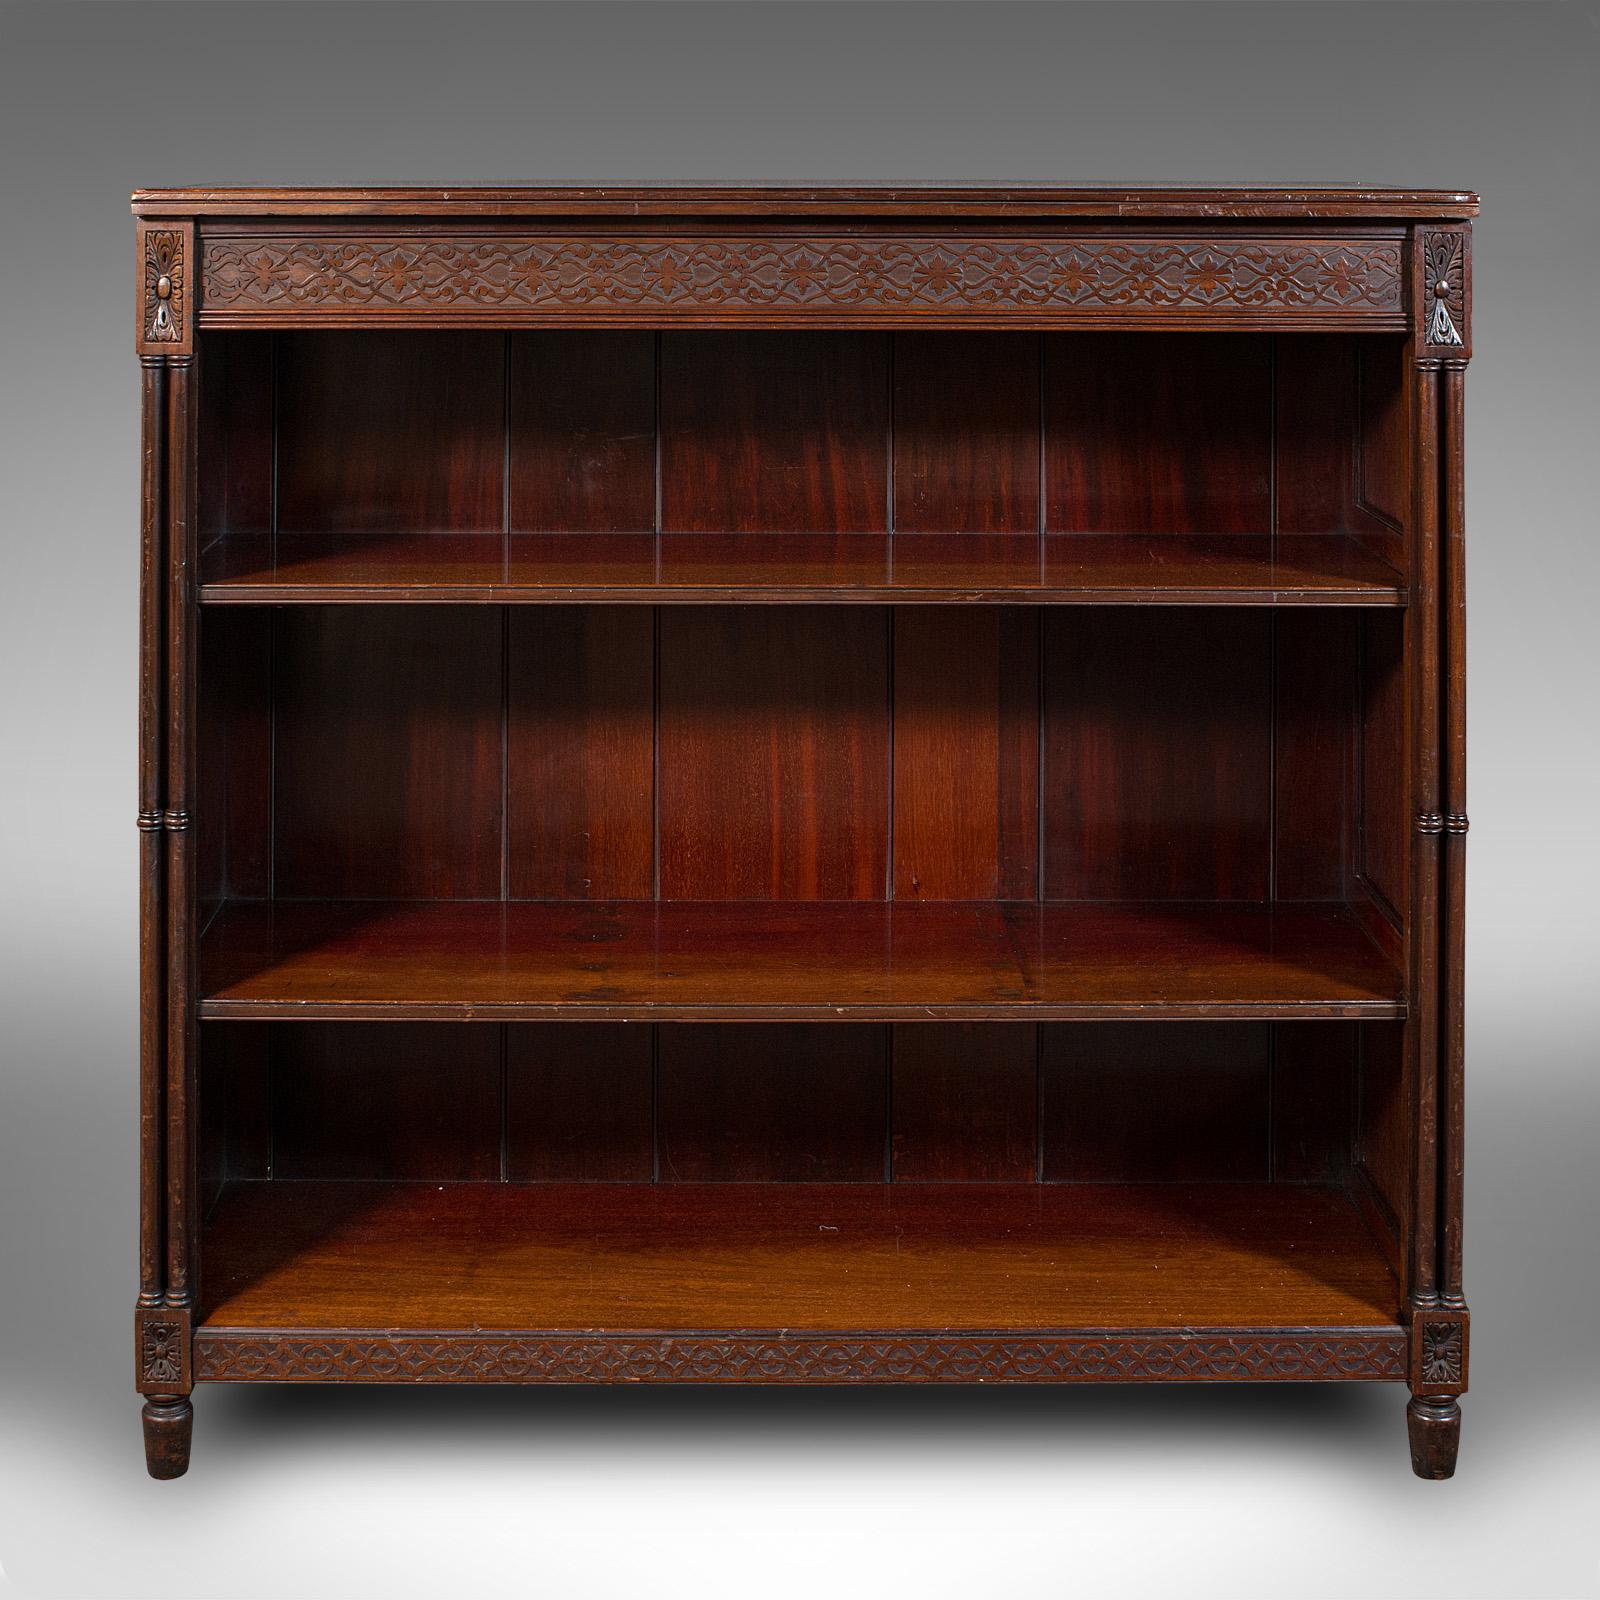 This is an antique drawing room book cabinet. An English, walnut decorative bookshelves, dating to the late Victorian period, circa 1880.

Tastefully crafted bookcase with appealing decorative detail
Displays a desirable aged patina and in good